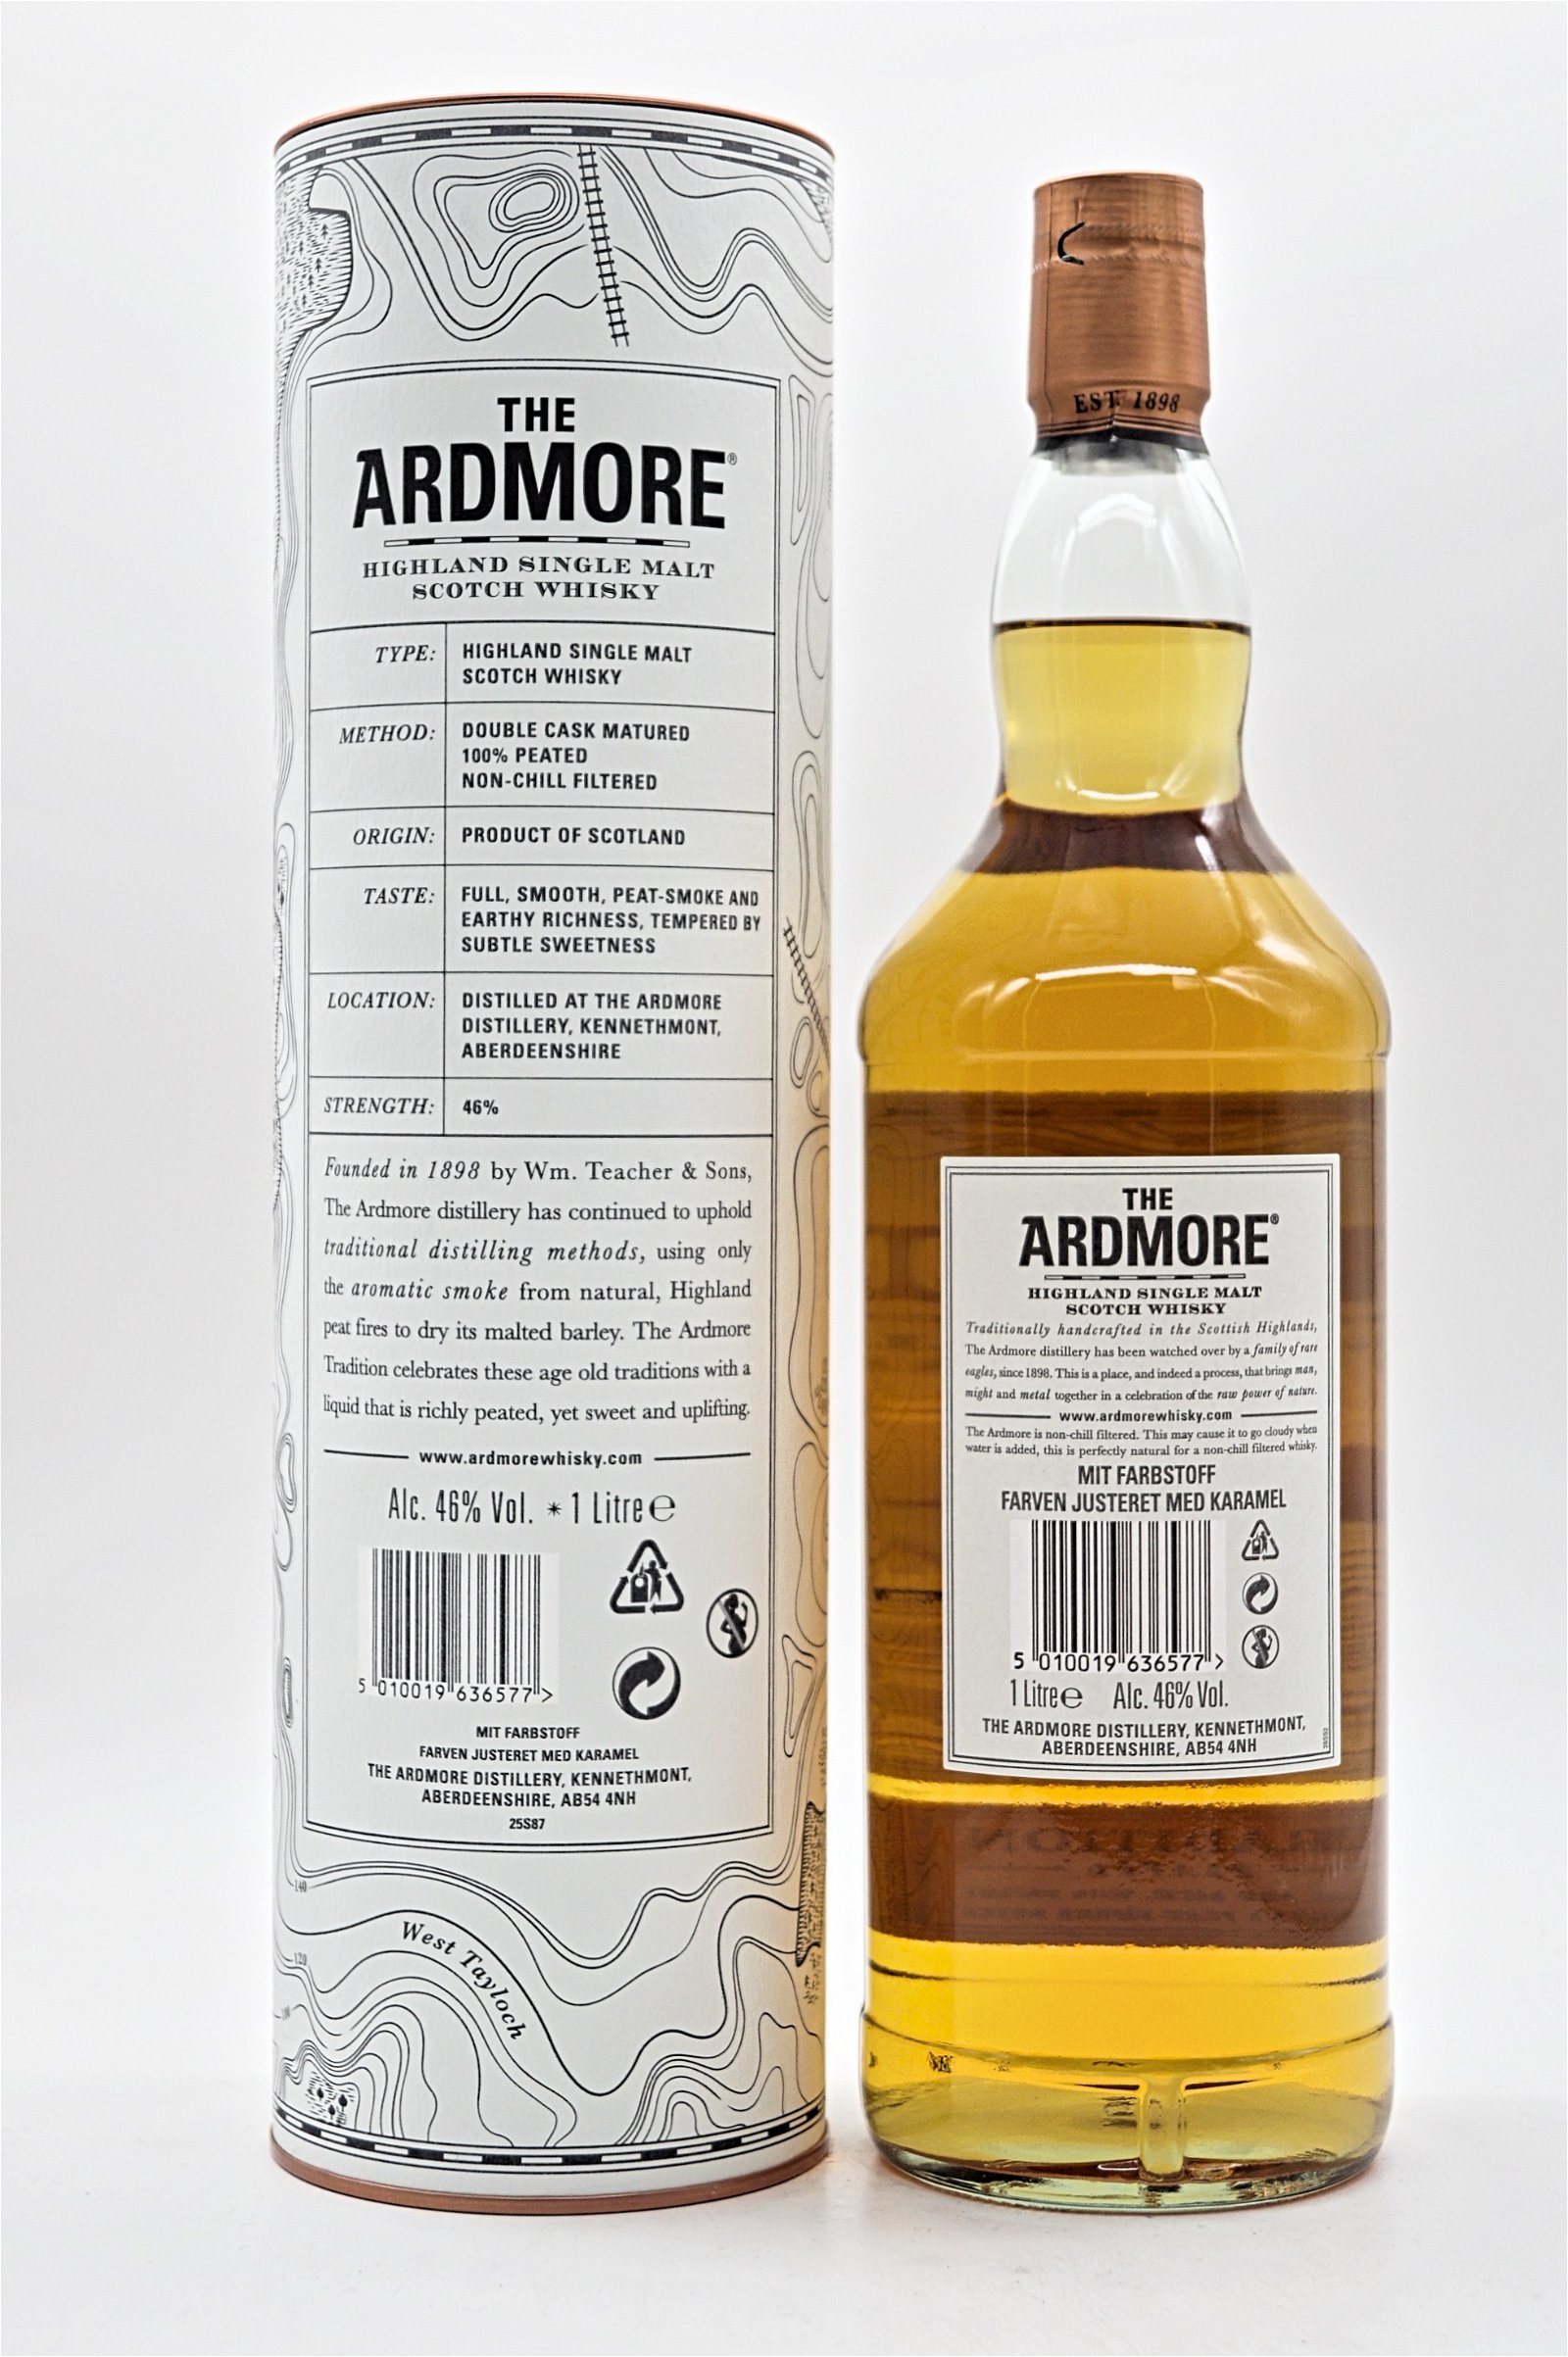 The Ardmore Traditional Peated Highland Single Malt Scotch Whisky